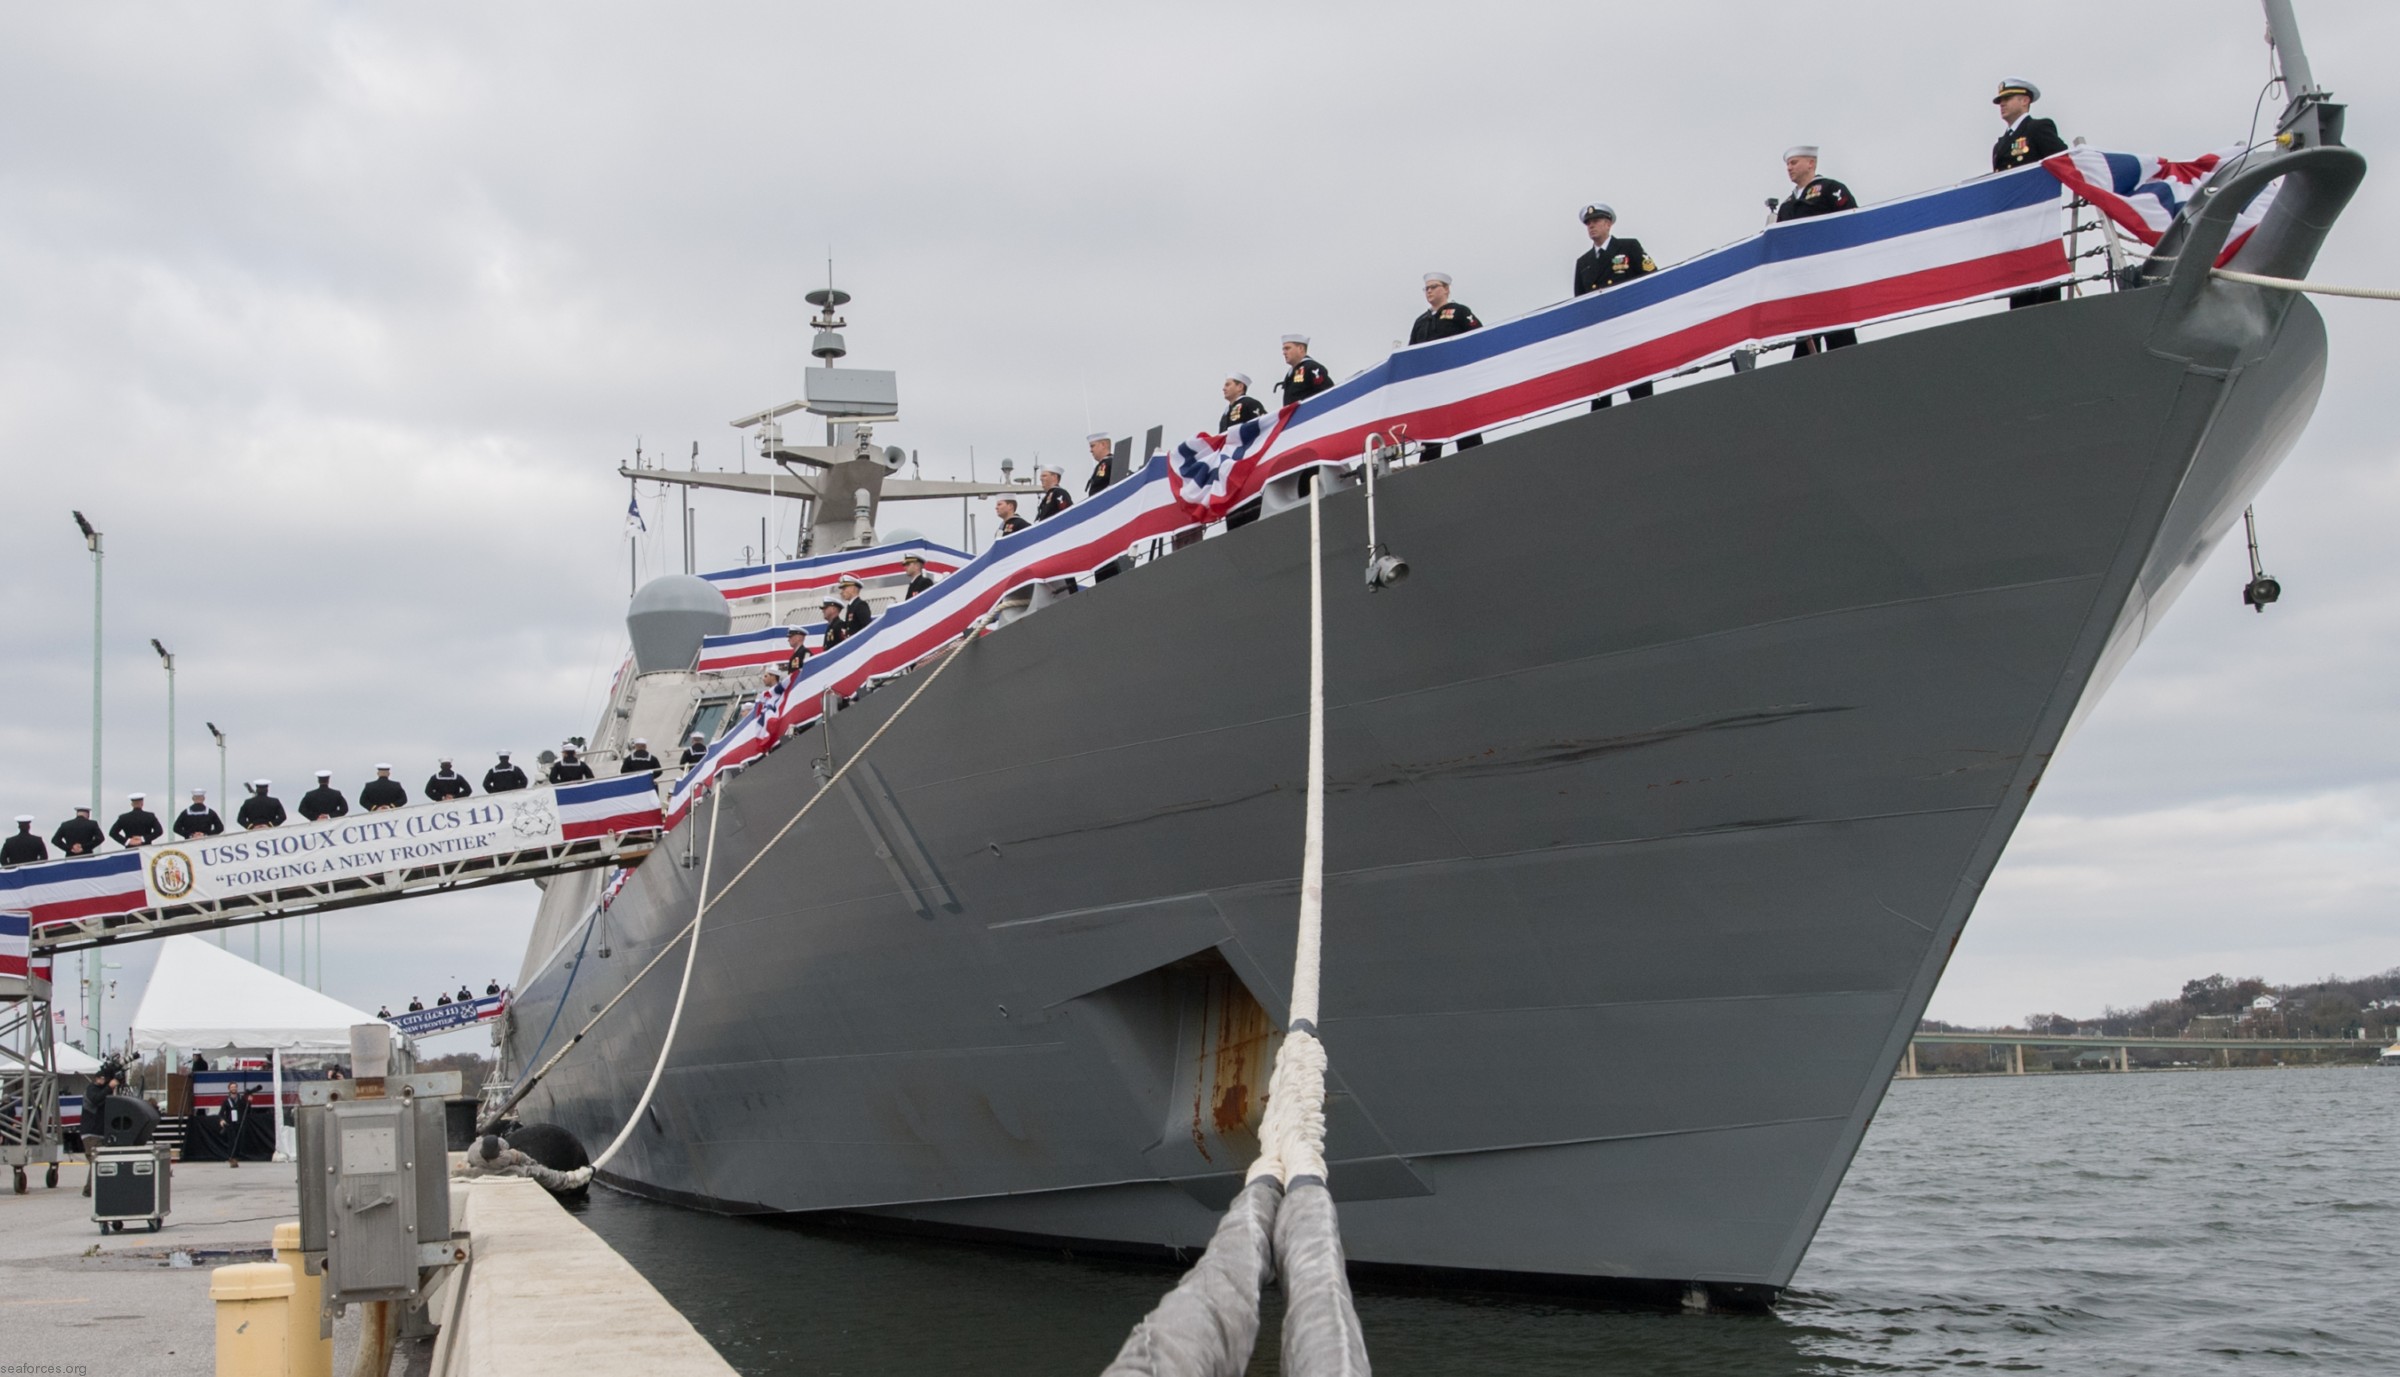 lcs-11 uss sioux city freedom class littoral combat ship 16 commissioning